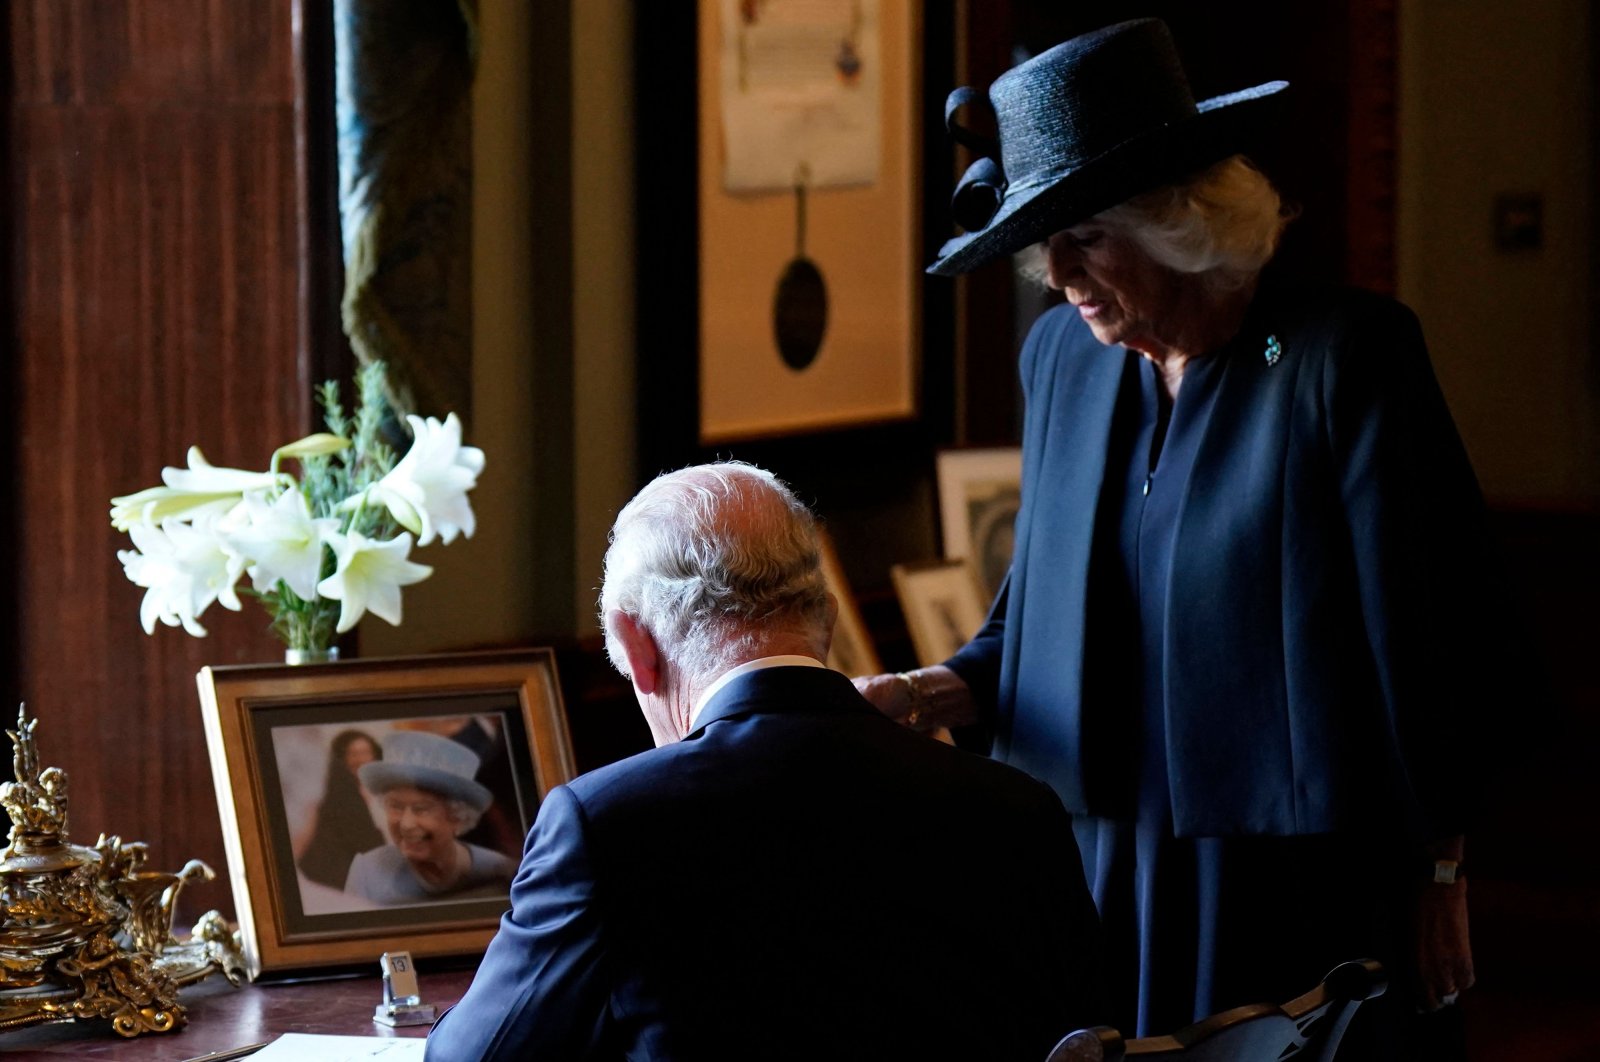 Britain&#039;s Camilla, Queen Consort (R), watches as Britain&#039;s King Charles III signs the visitors&#039; book, alongside an image of his late mother Queen Elizabeth II, at Hillsborough Castle in Belfast, during his visit to Northern Ireland, Sept. 13, 2022. (AFP Photo)